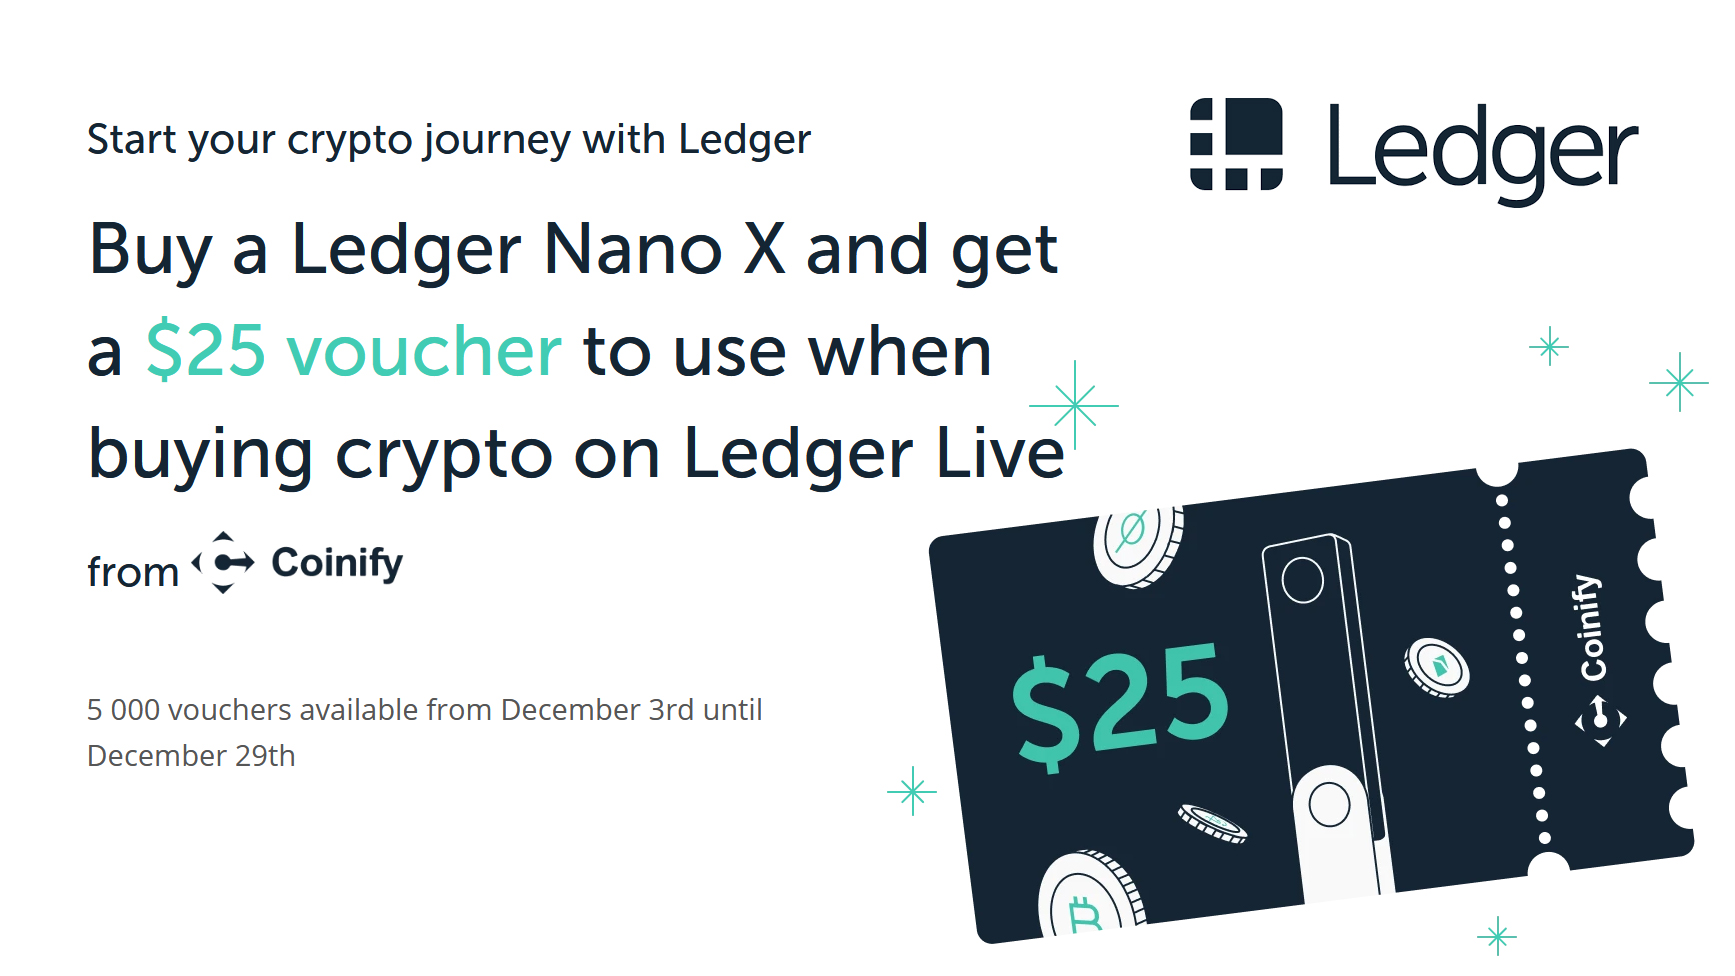 Up-to-Date Ledger Nano X Coupon Codes | March 